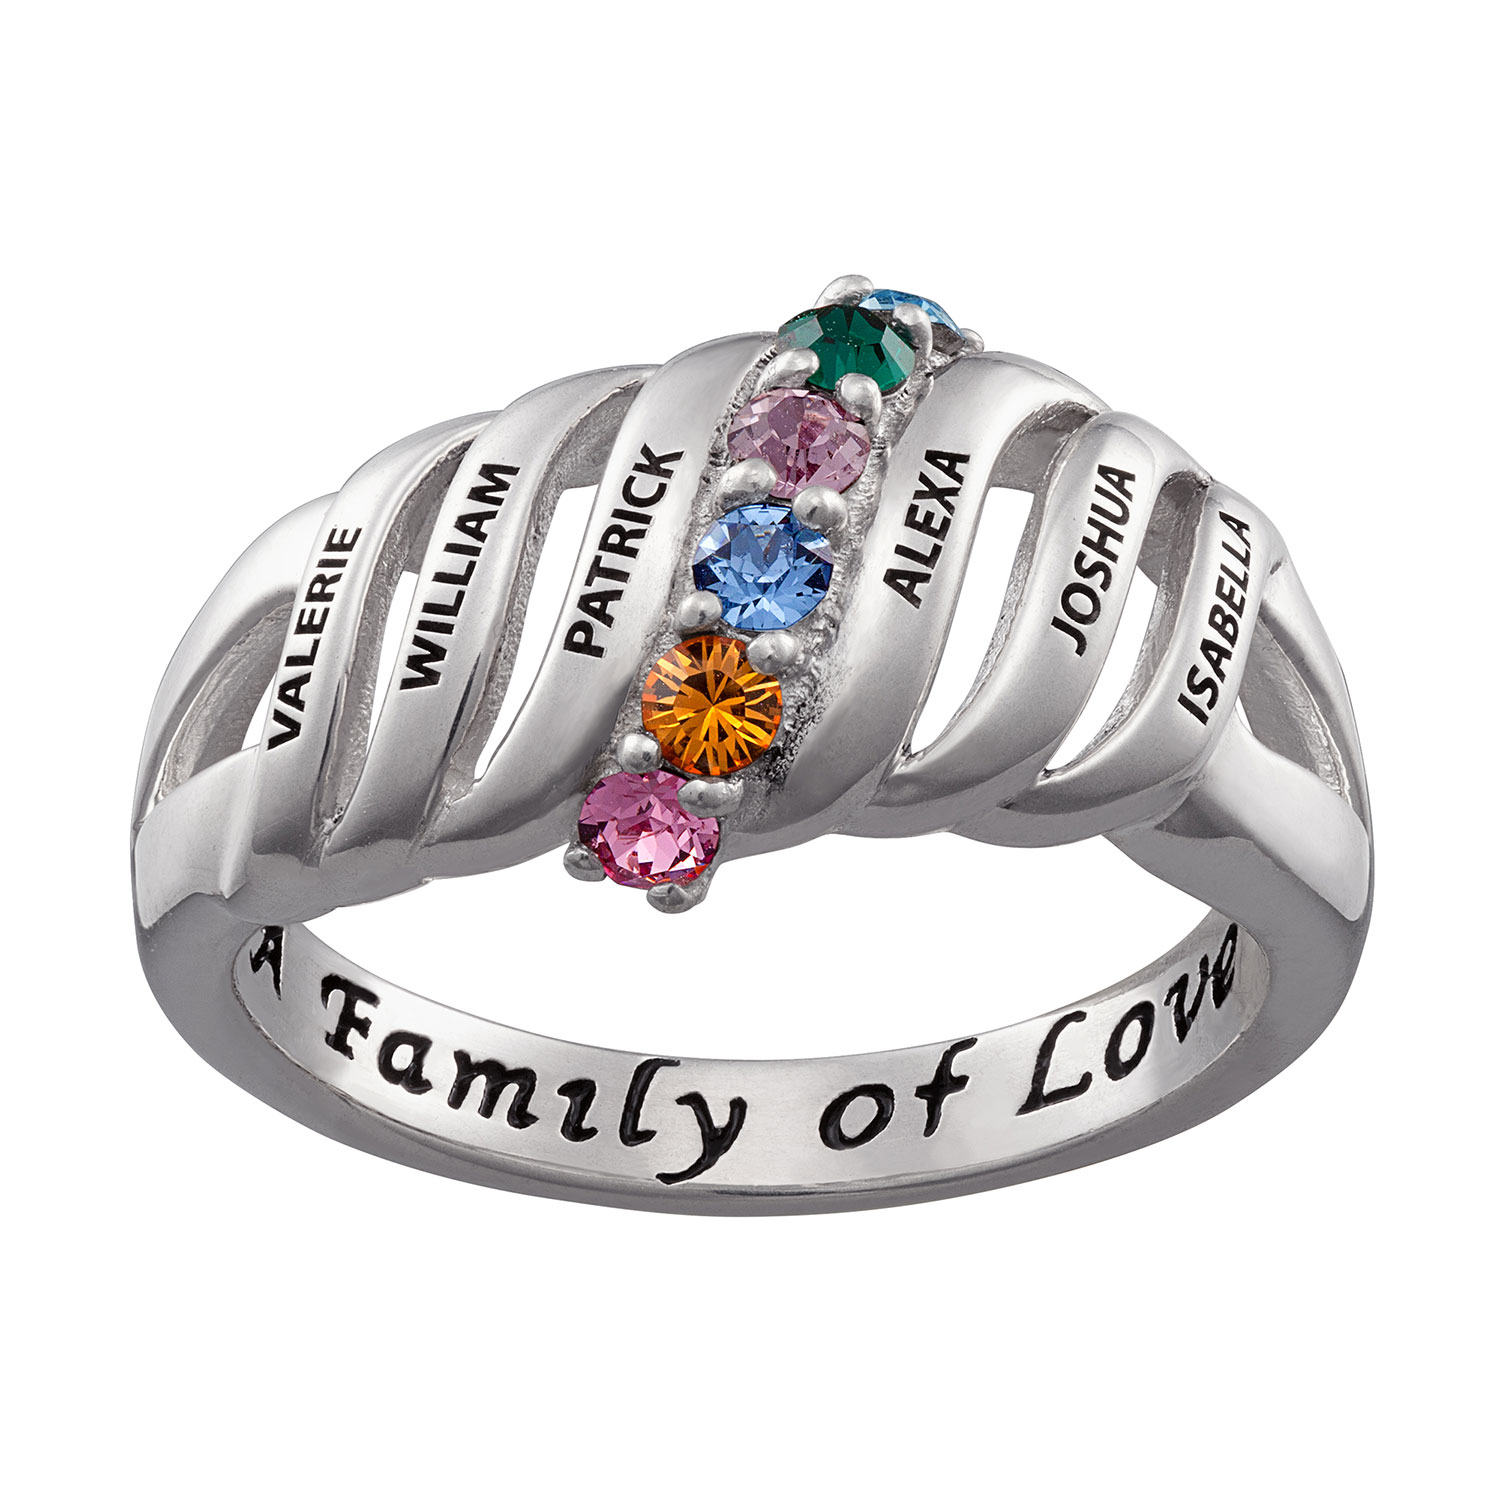 Family Name and Birthstone Ring